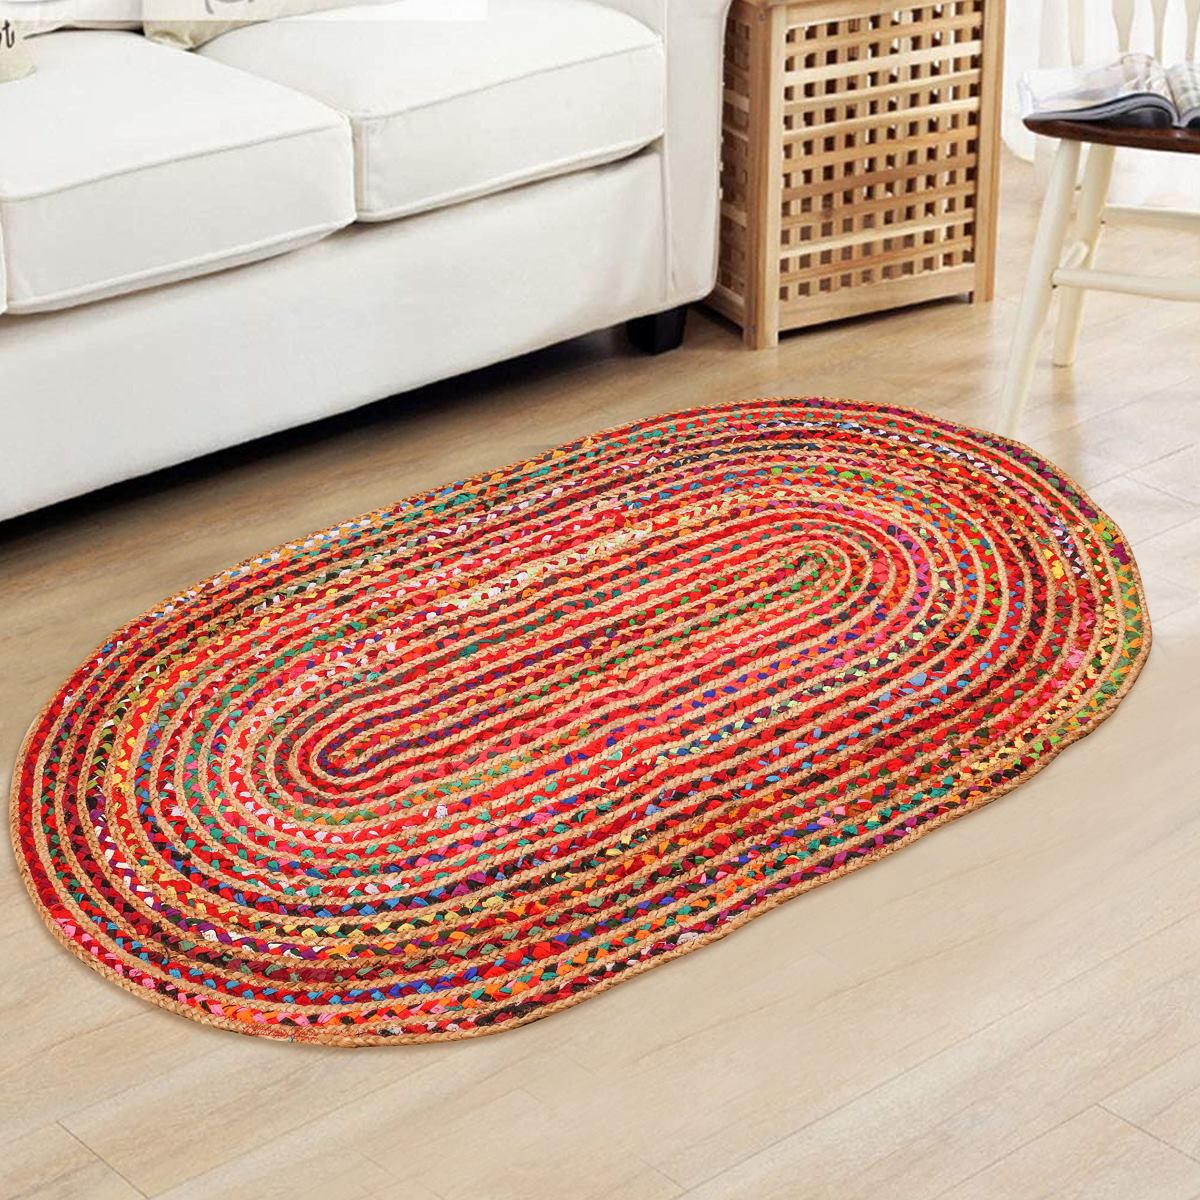 What Is Chindi Rug